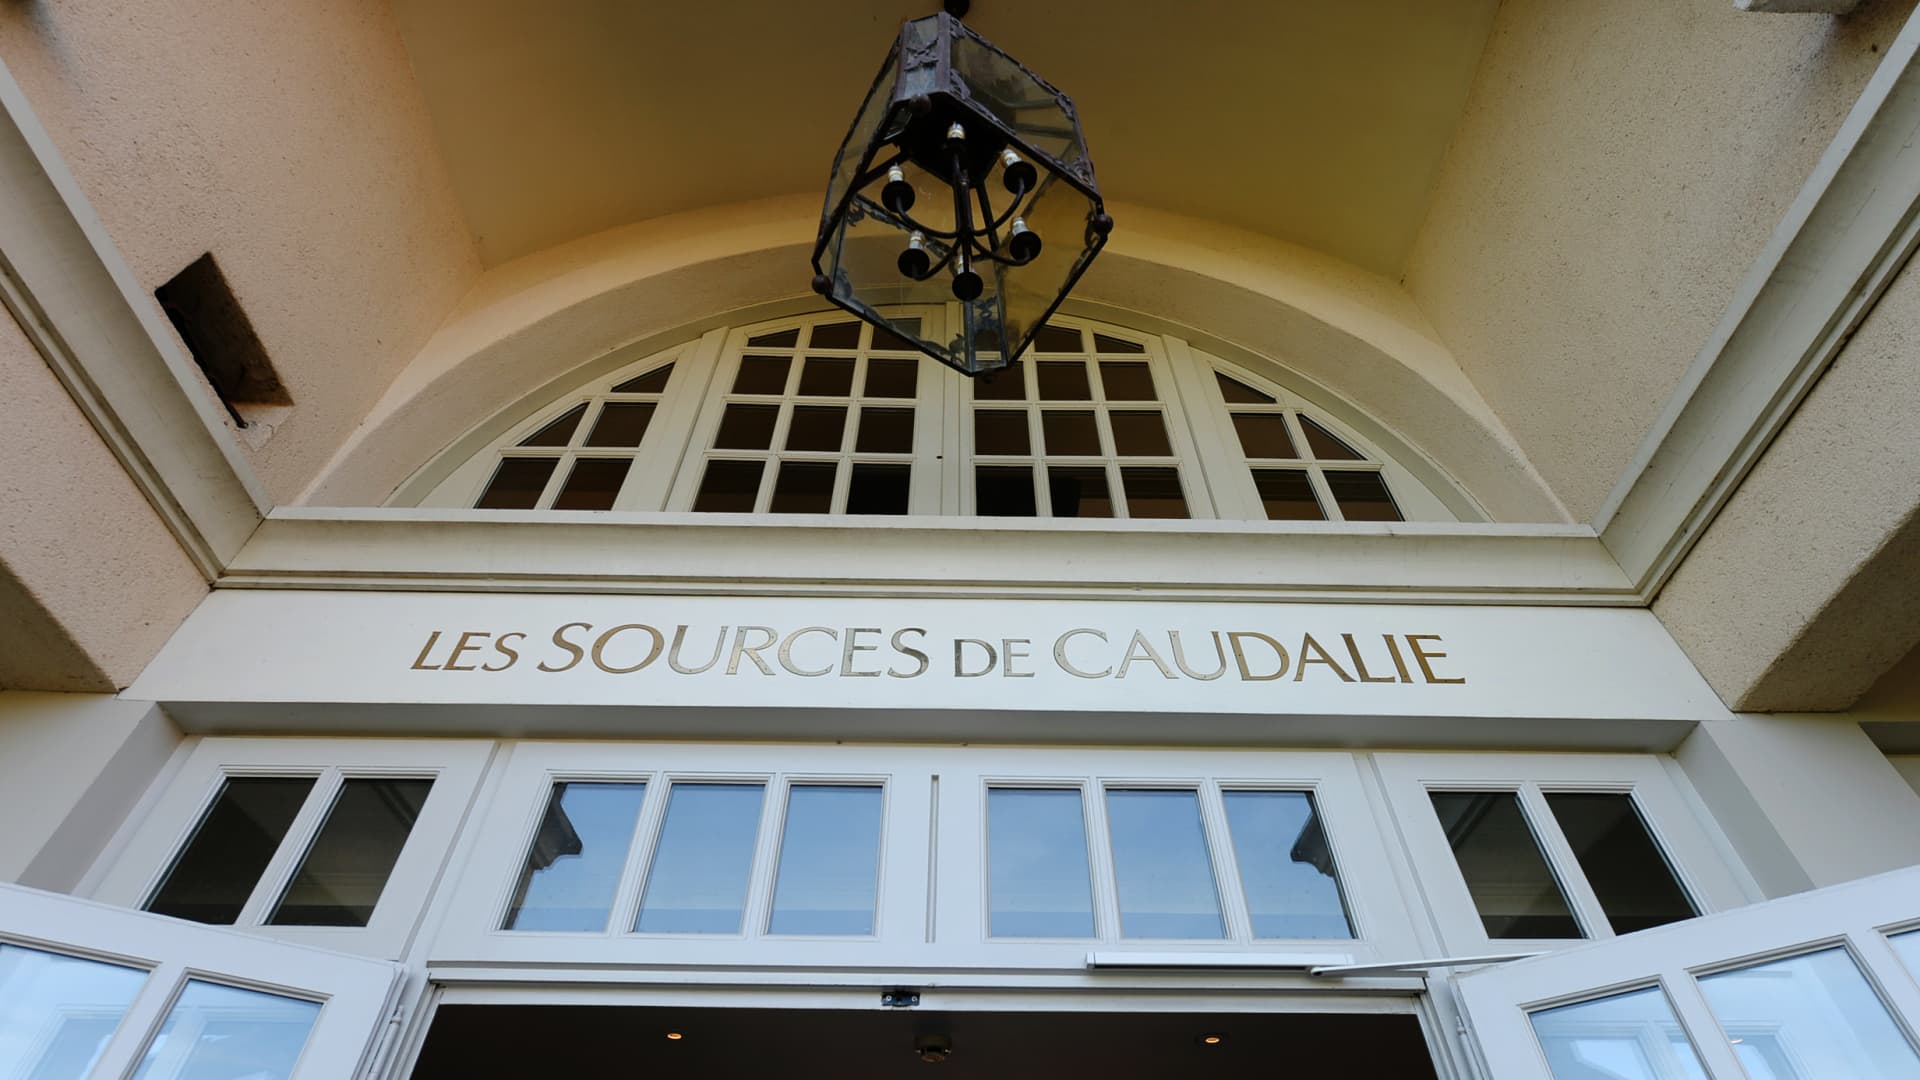 Les Sources de Caudalie is a five-star hotel and spa on the estate of the Chateau Smith Haut Lafitte vineyard near the city of Bordeaux.